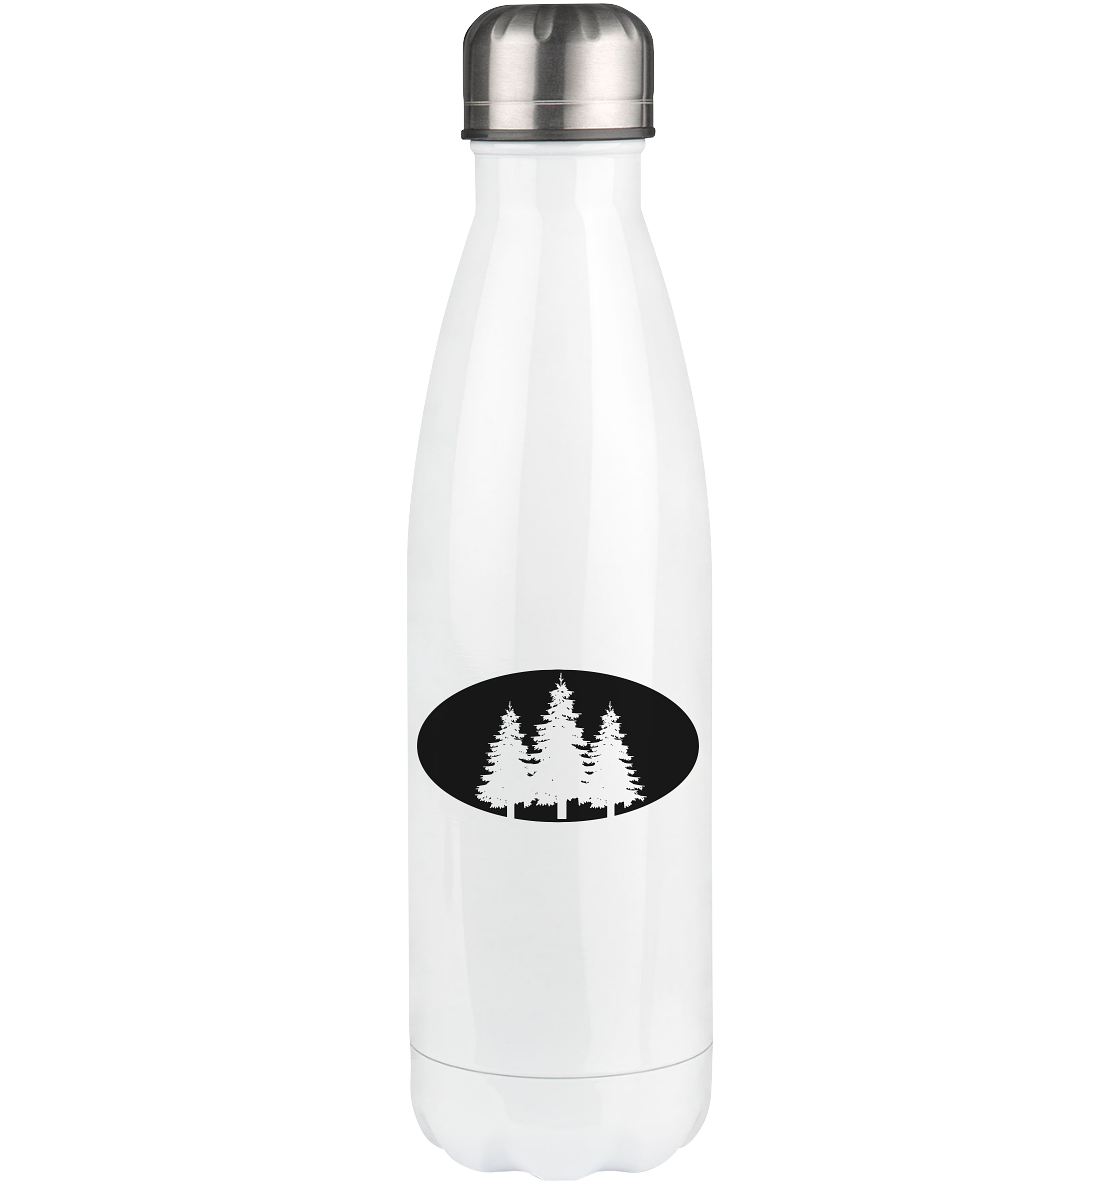 Semicircle and Trees - Edelstahl Thermosflasche camping UONP 500ml